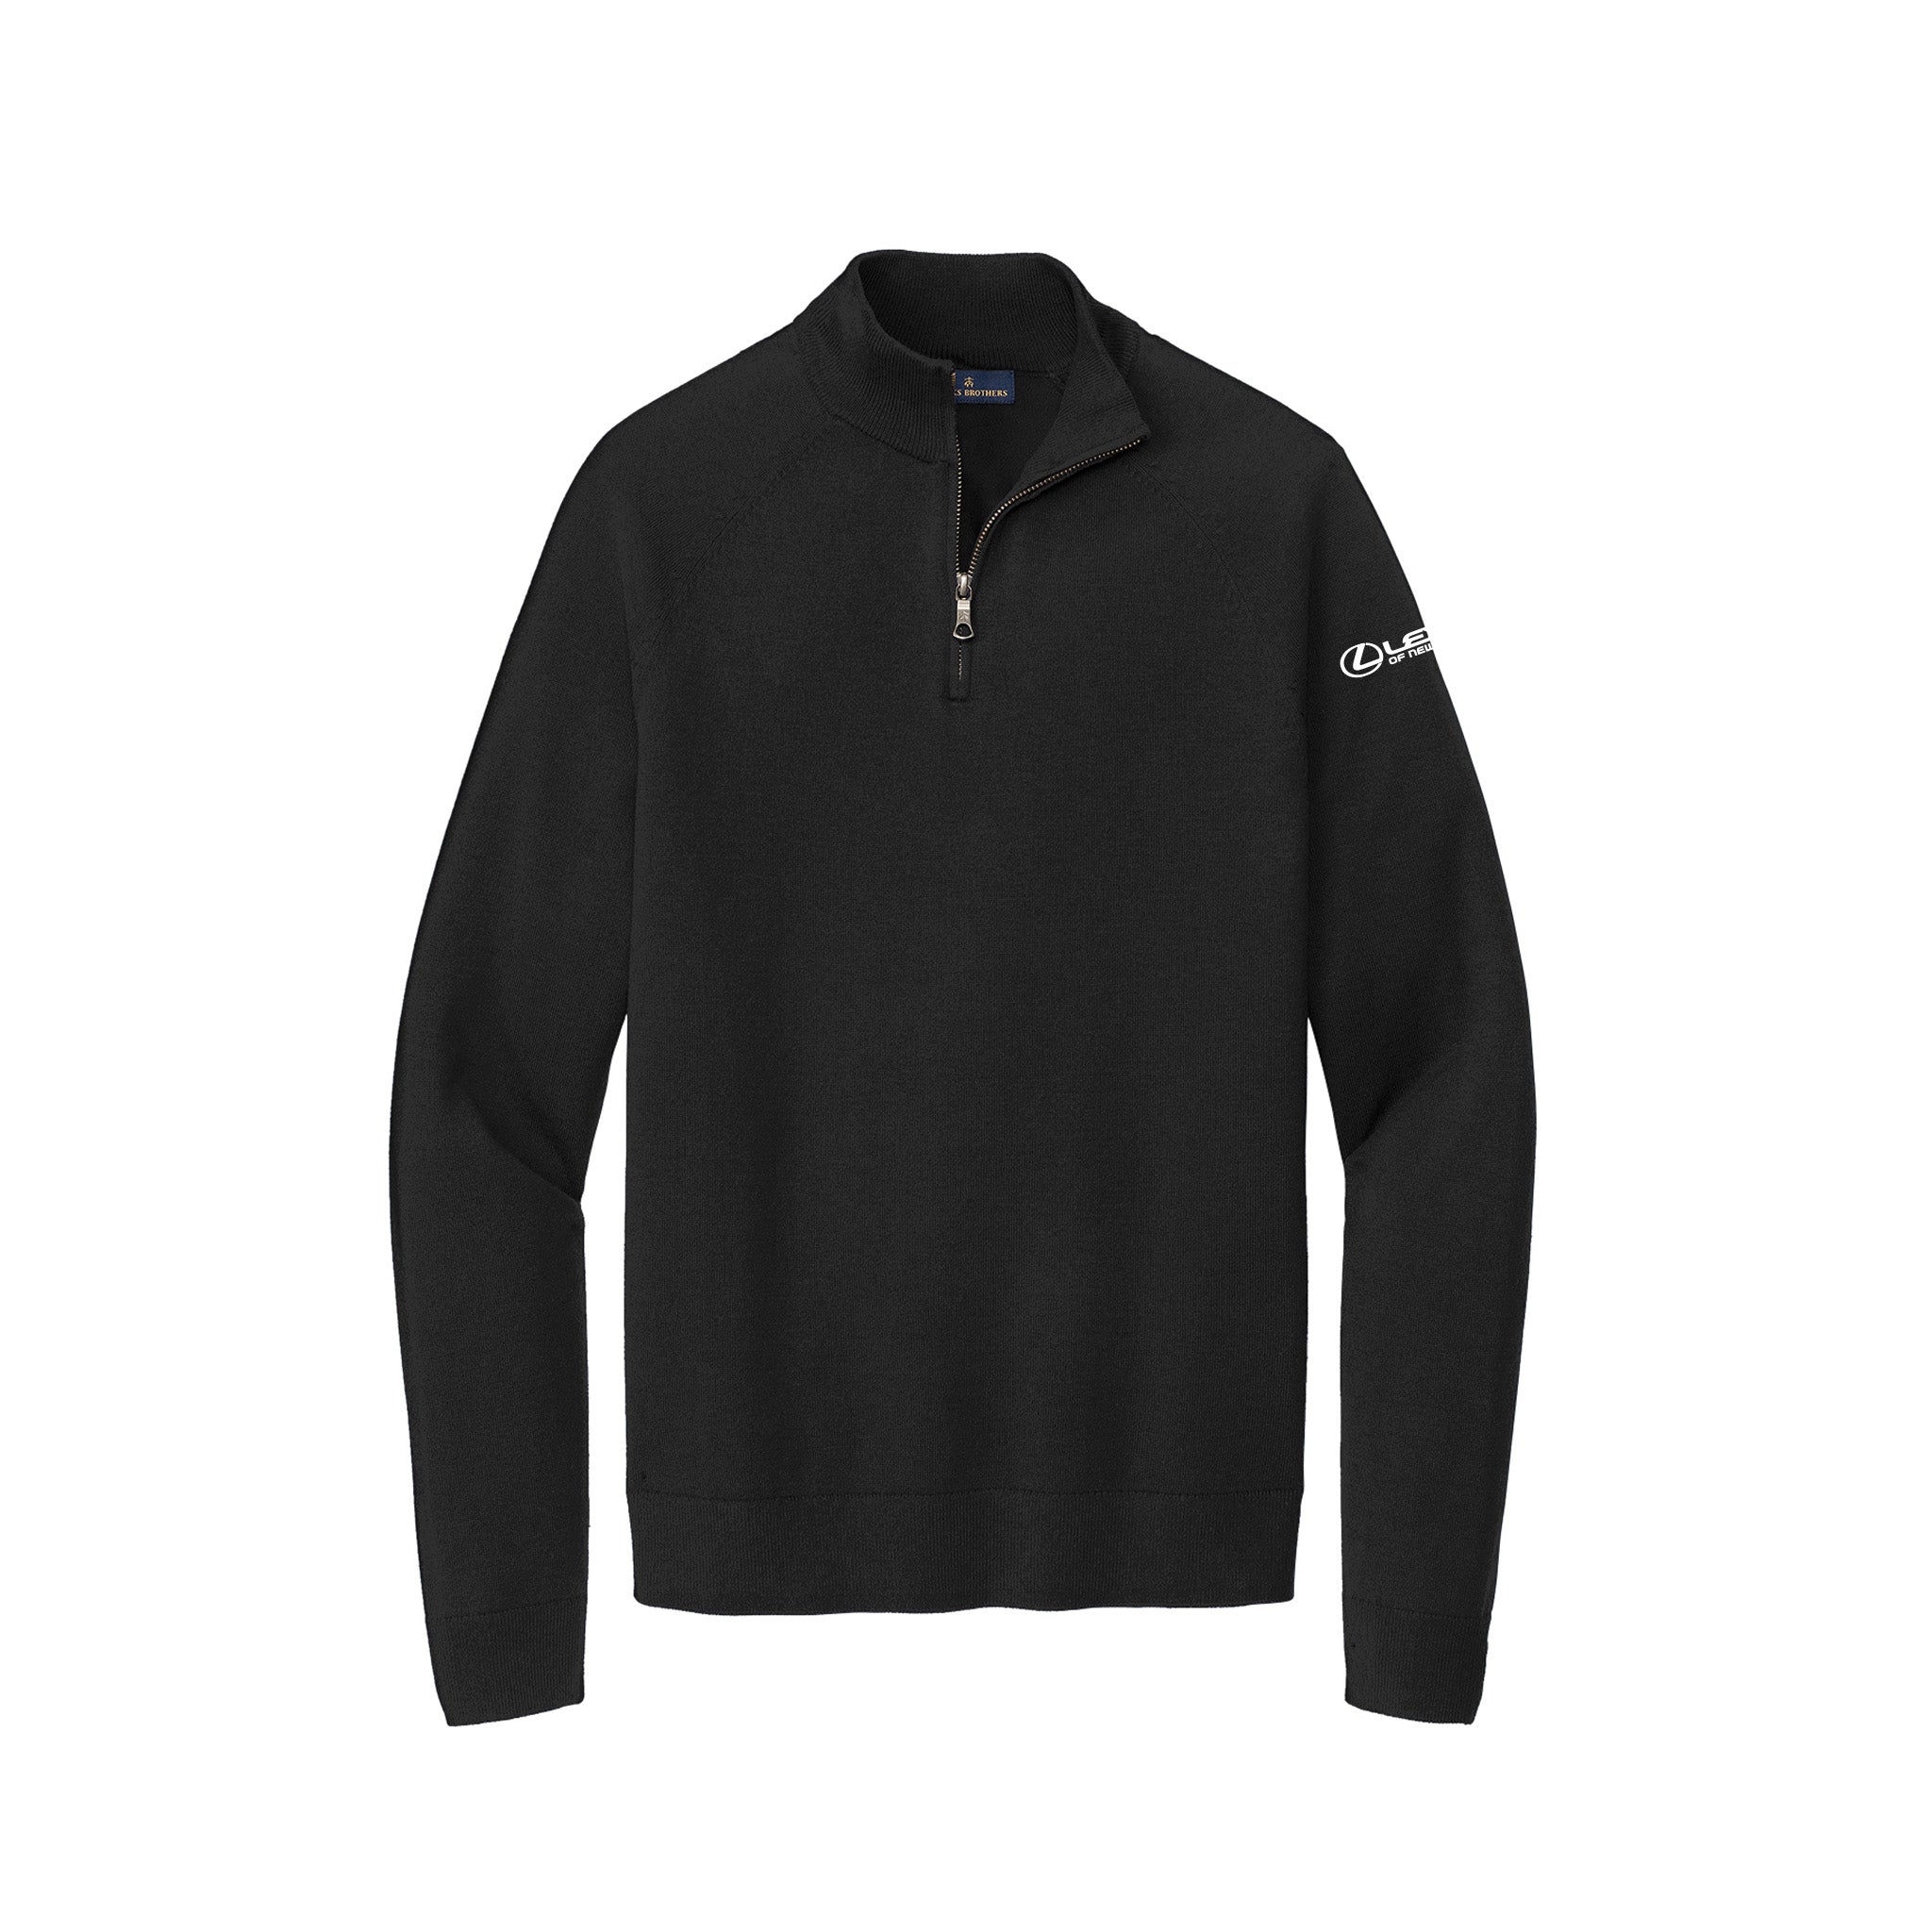 Lexus of New Orleans - Brooks Brothers® Cotton Stretch 1/4-Zip Sweater